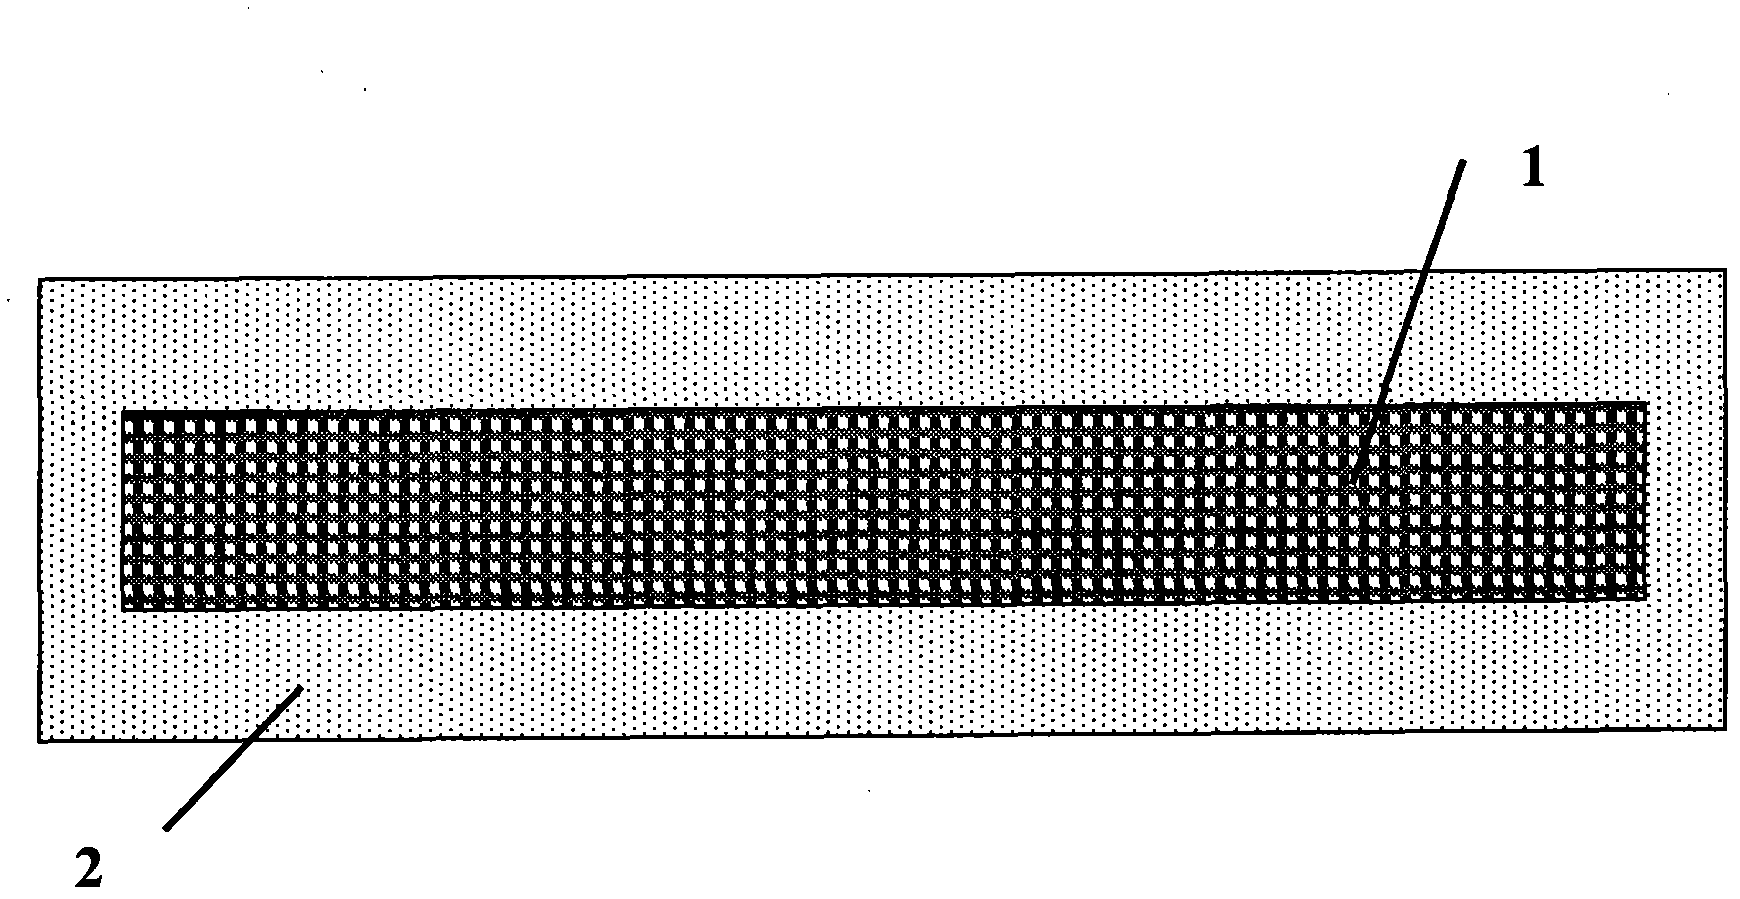 Thinned belted layer component for radial tire